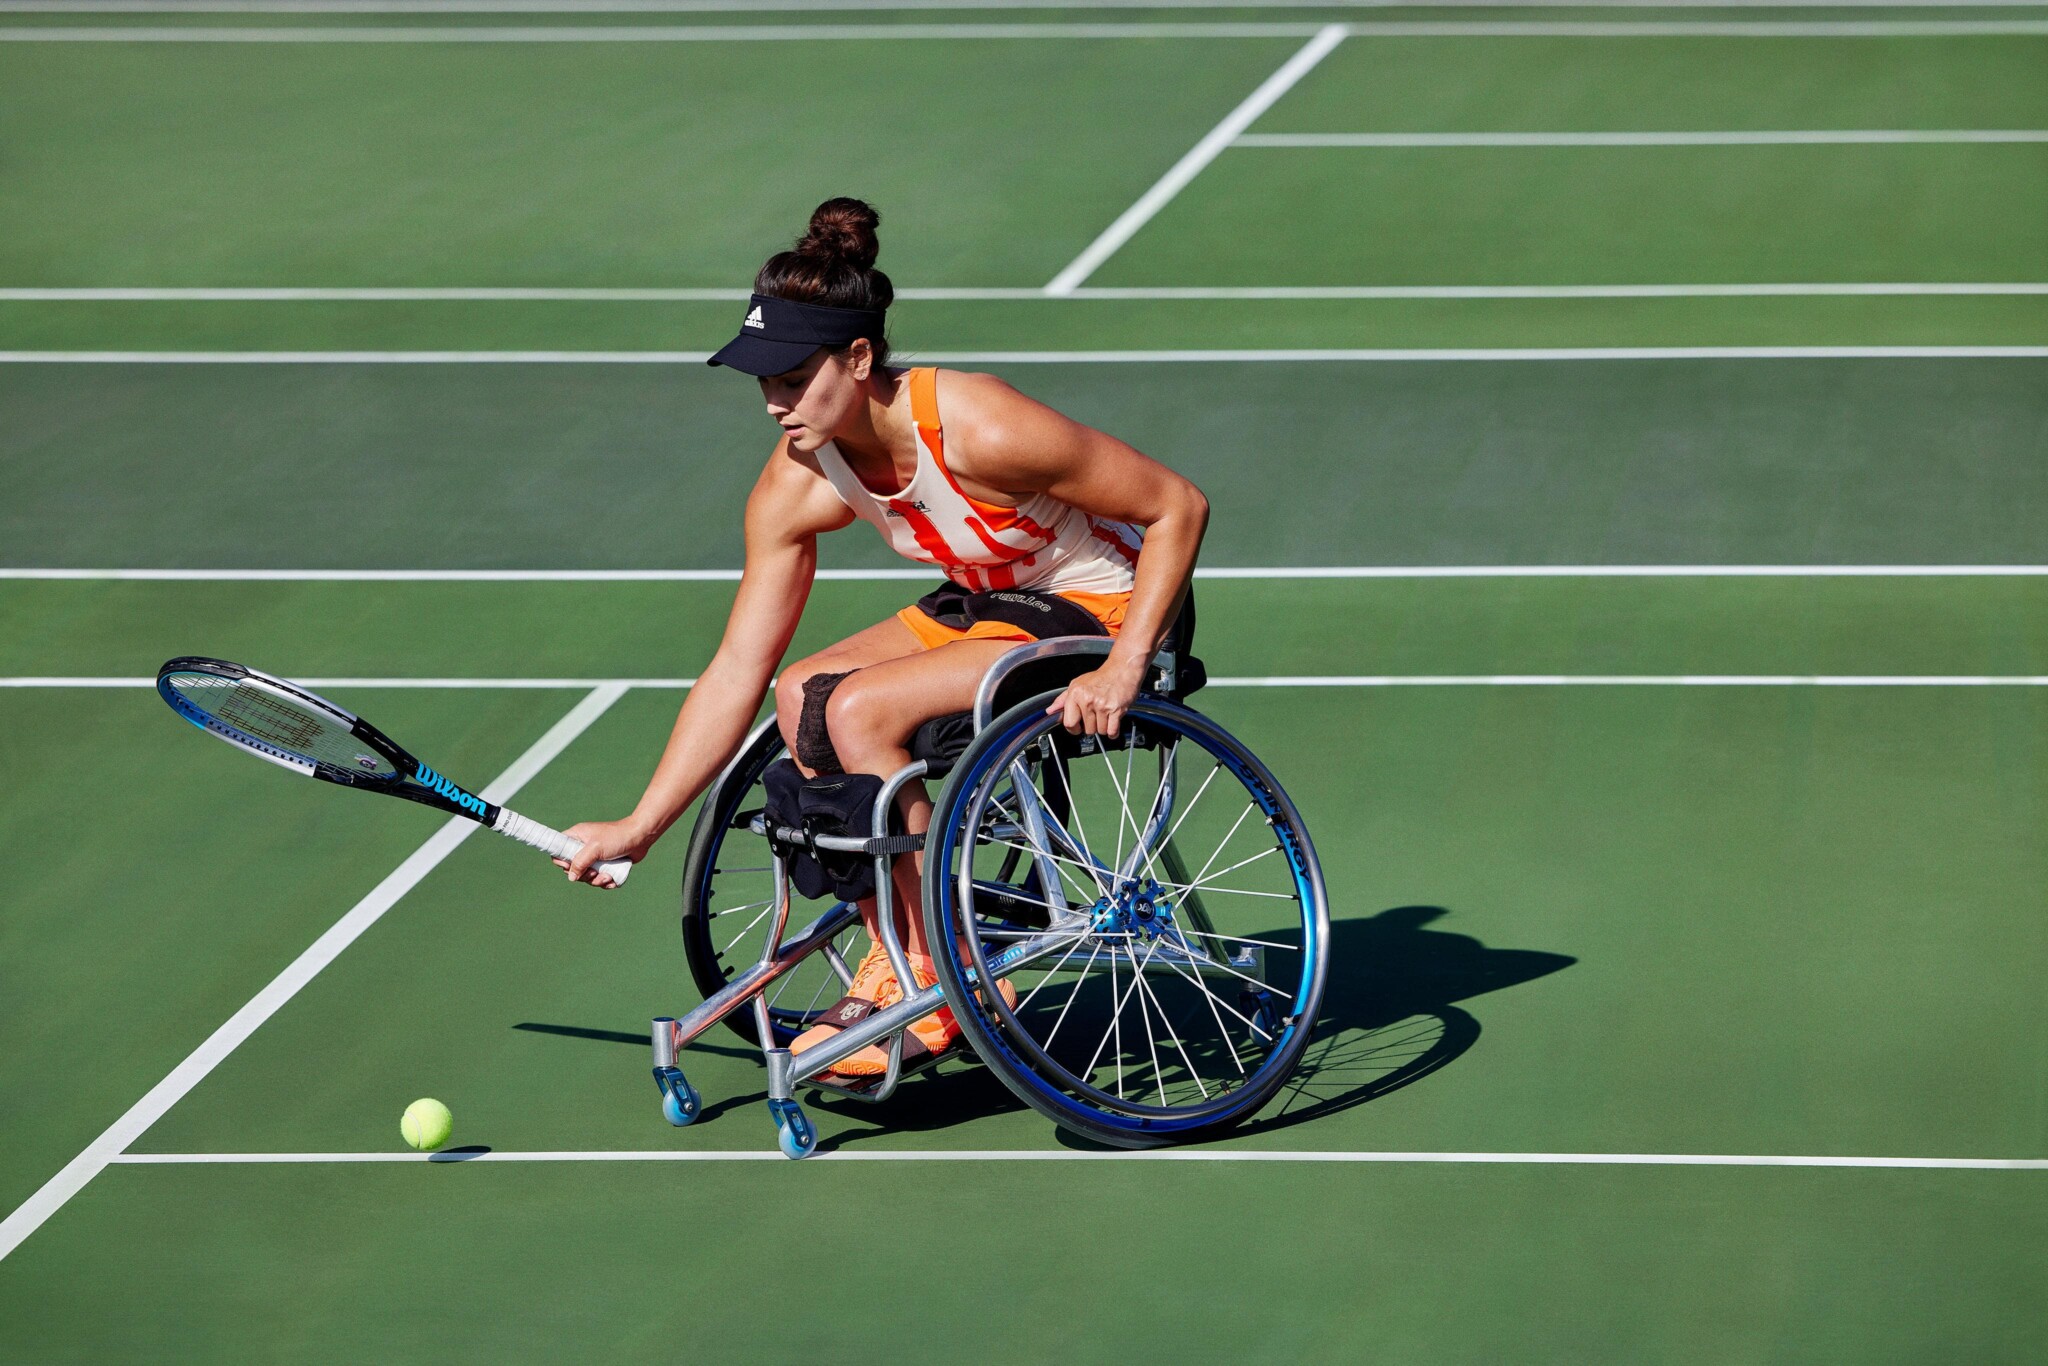 Wheelchair tennis player Dana Mathewson sits in her char with a racket stretched out to hit a tennis ball.